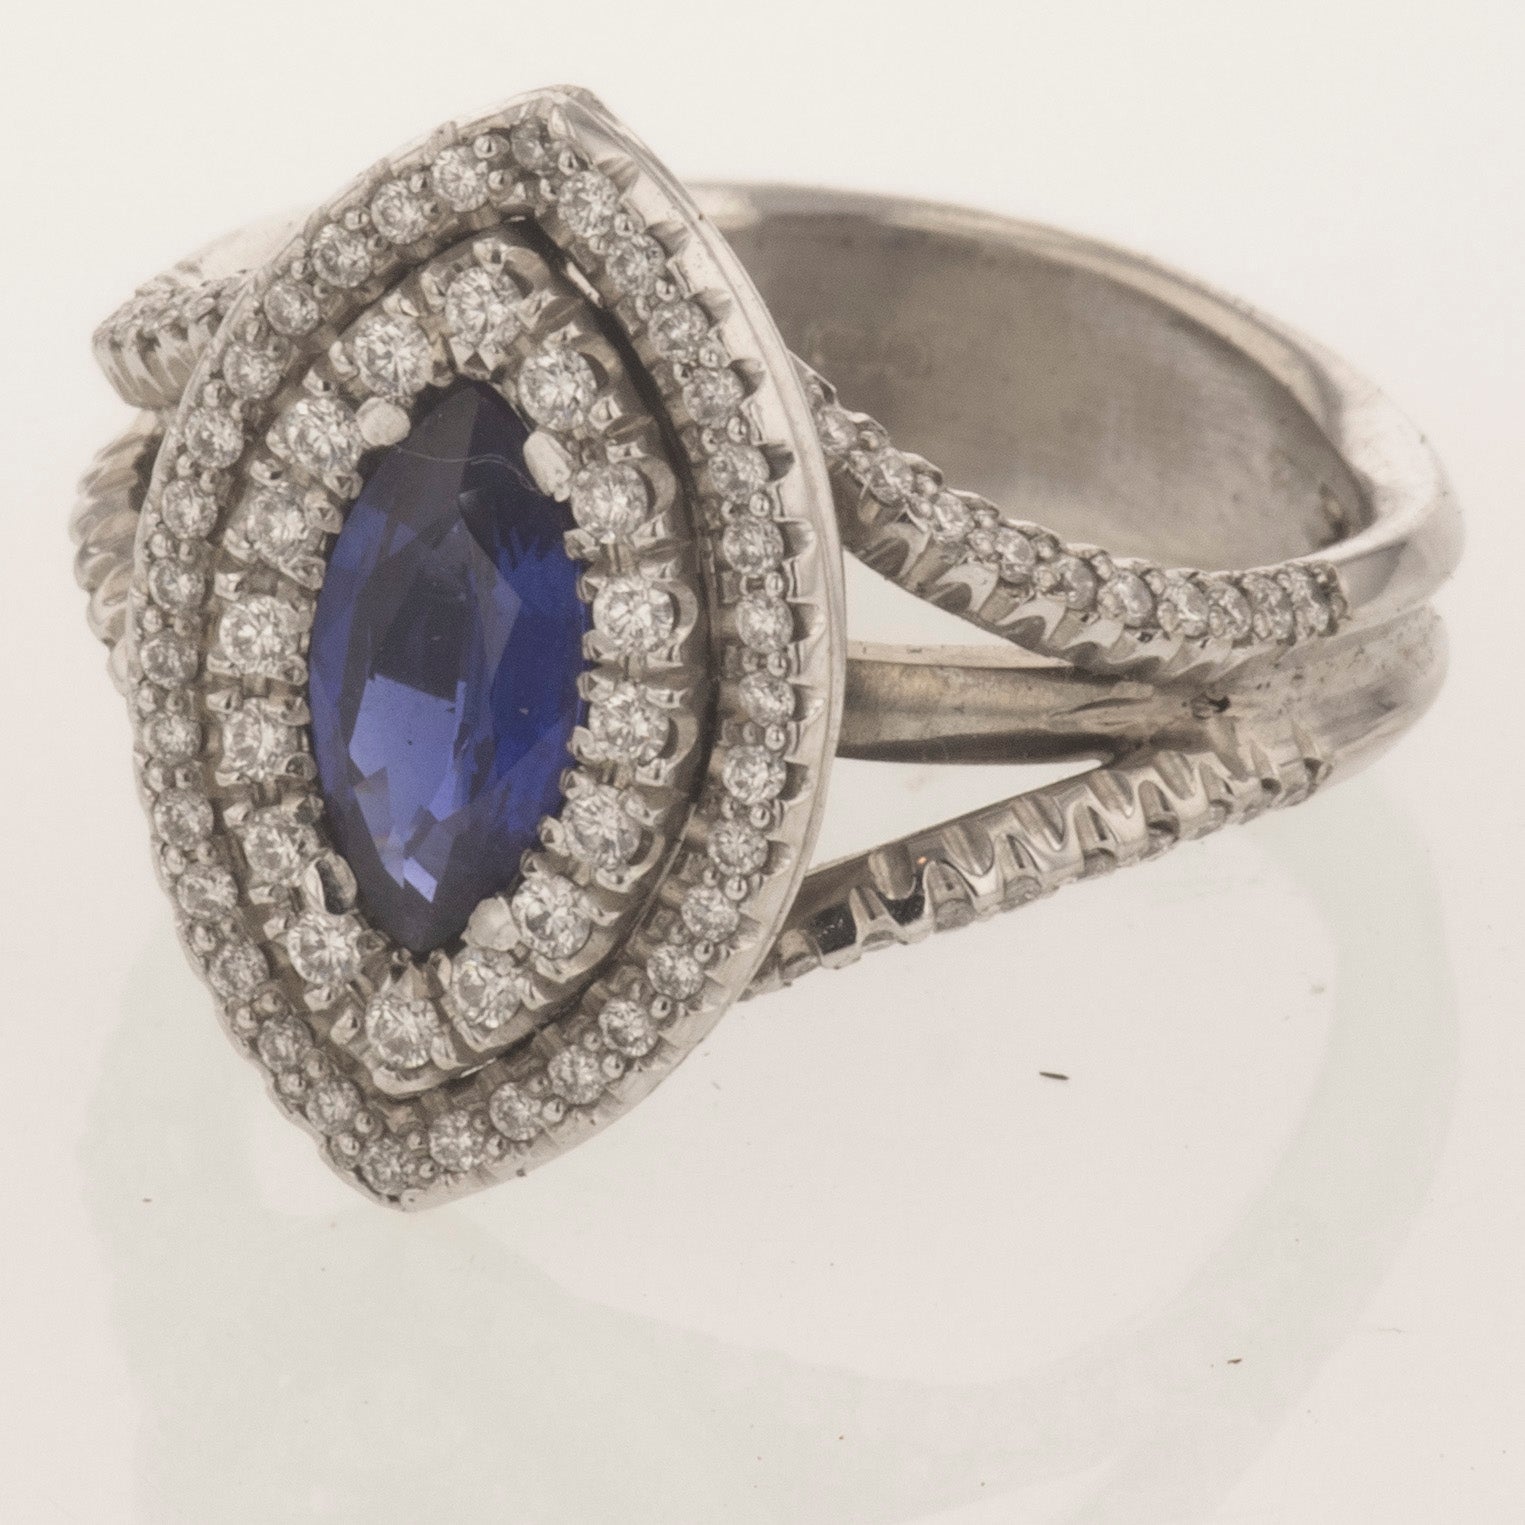 Marquise sapphire and diamonds ring